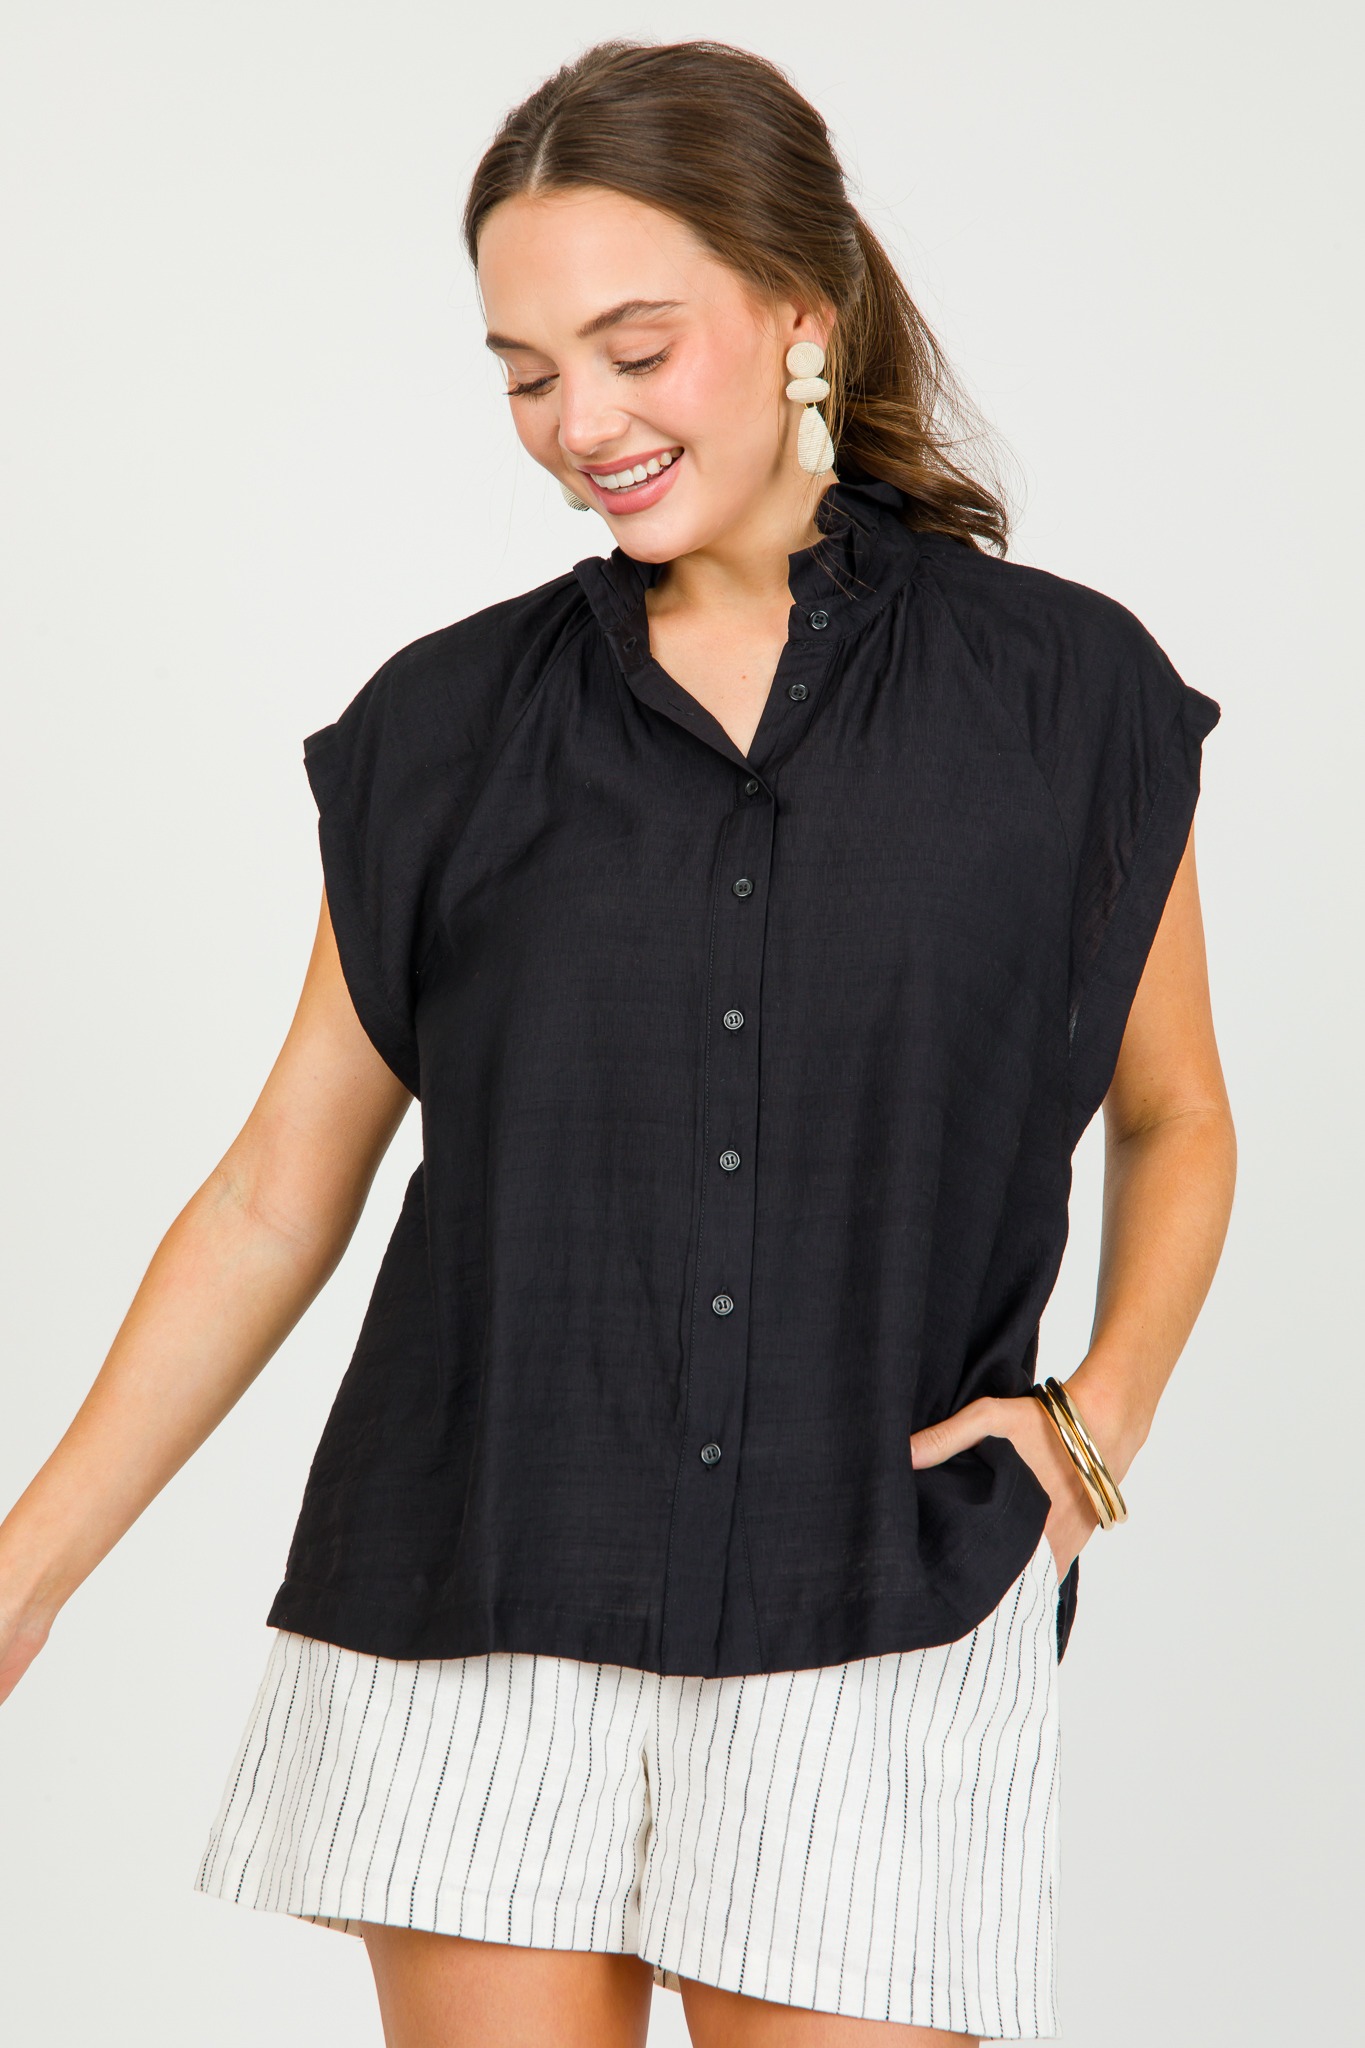 Melinda Button Up Blouse, Off White - New Arrivals - The Blue Door 